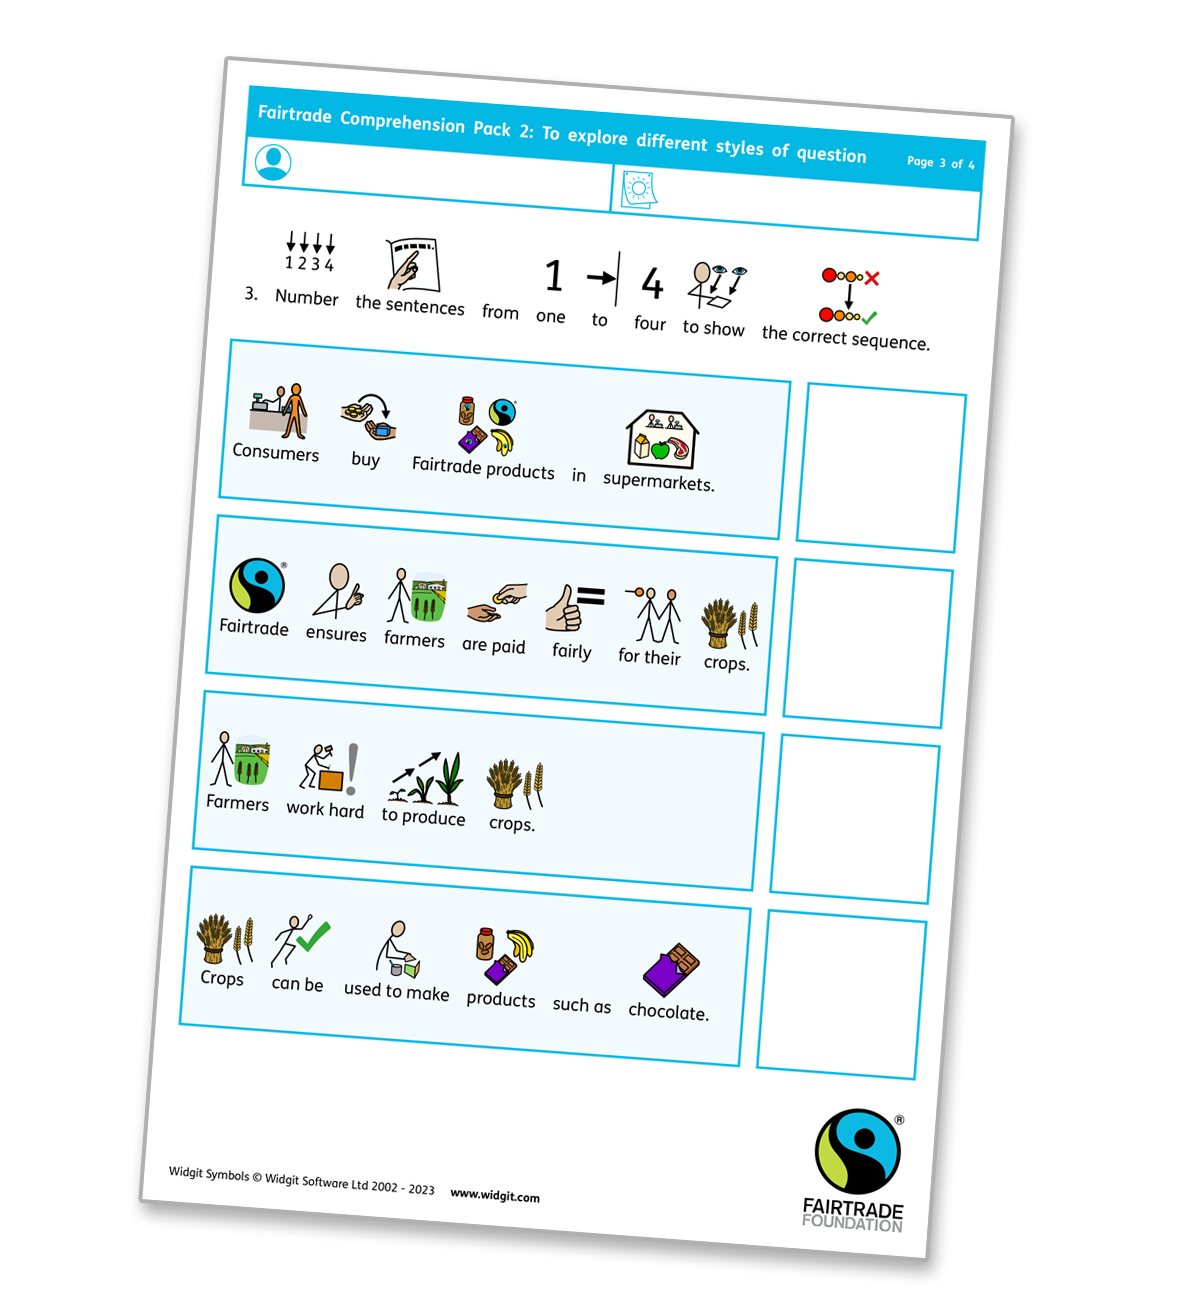 Fairtrade Comprehension Pack 2